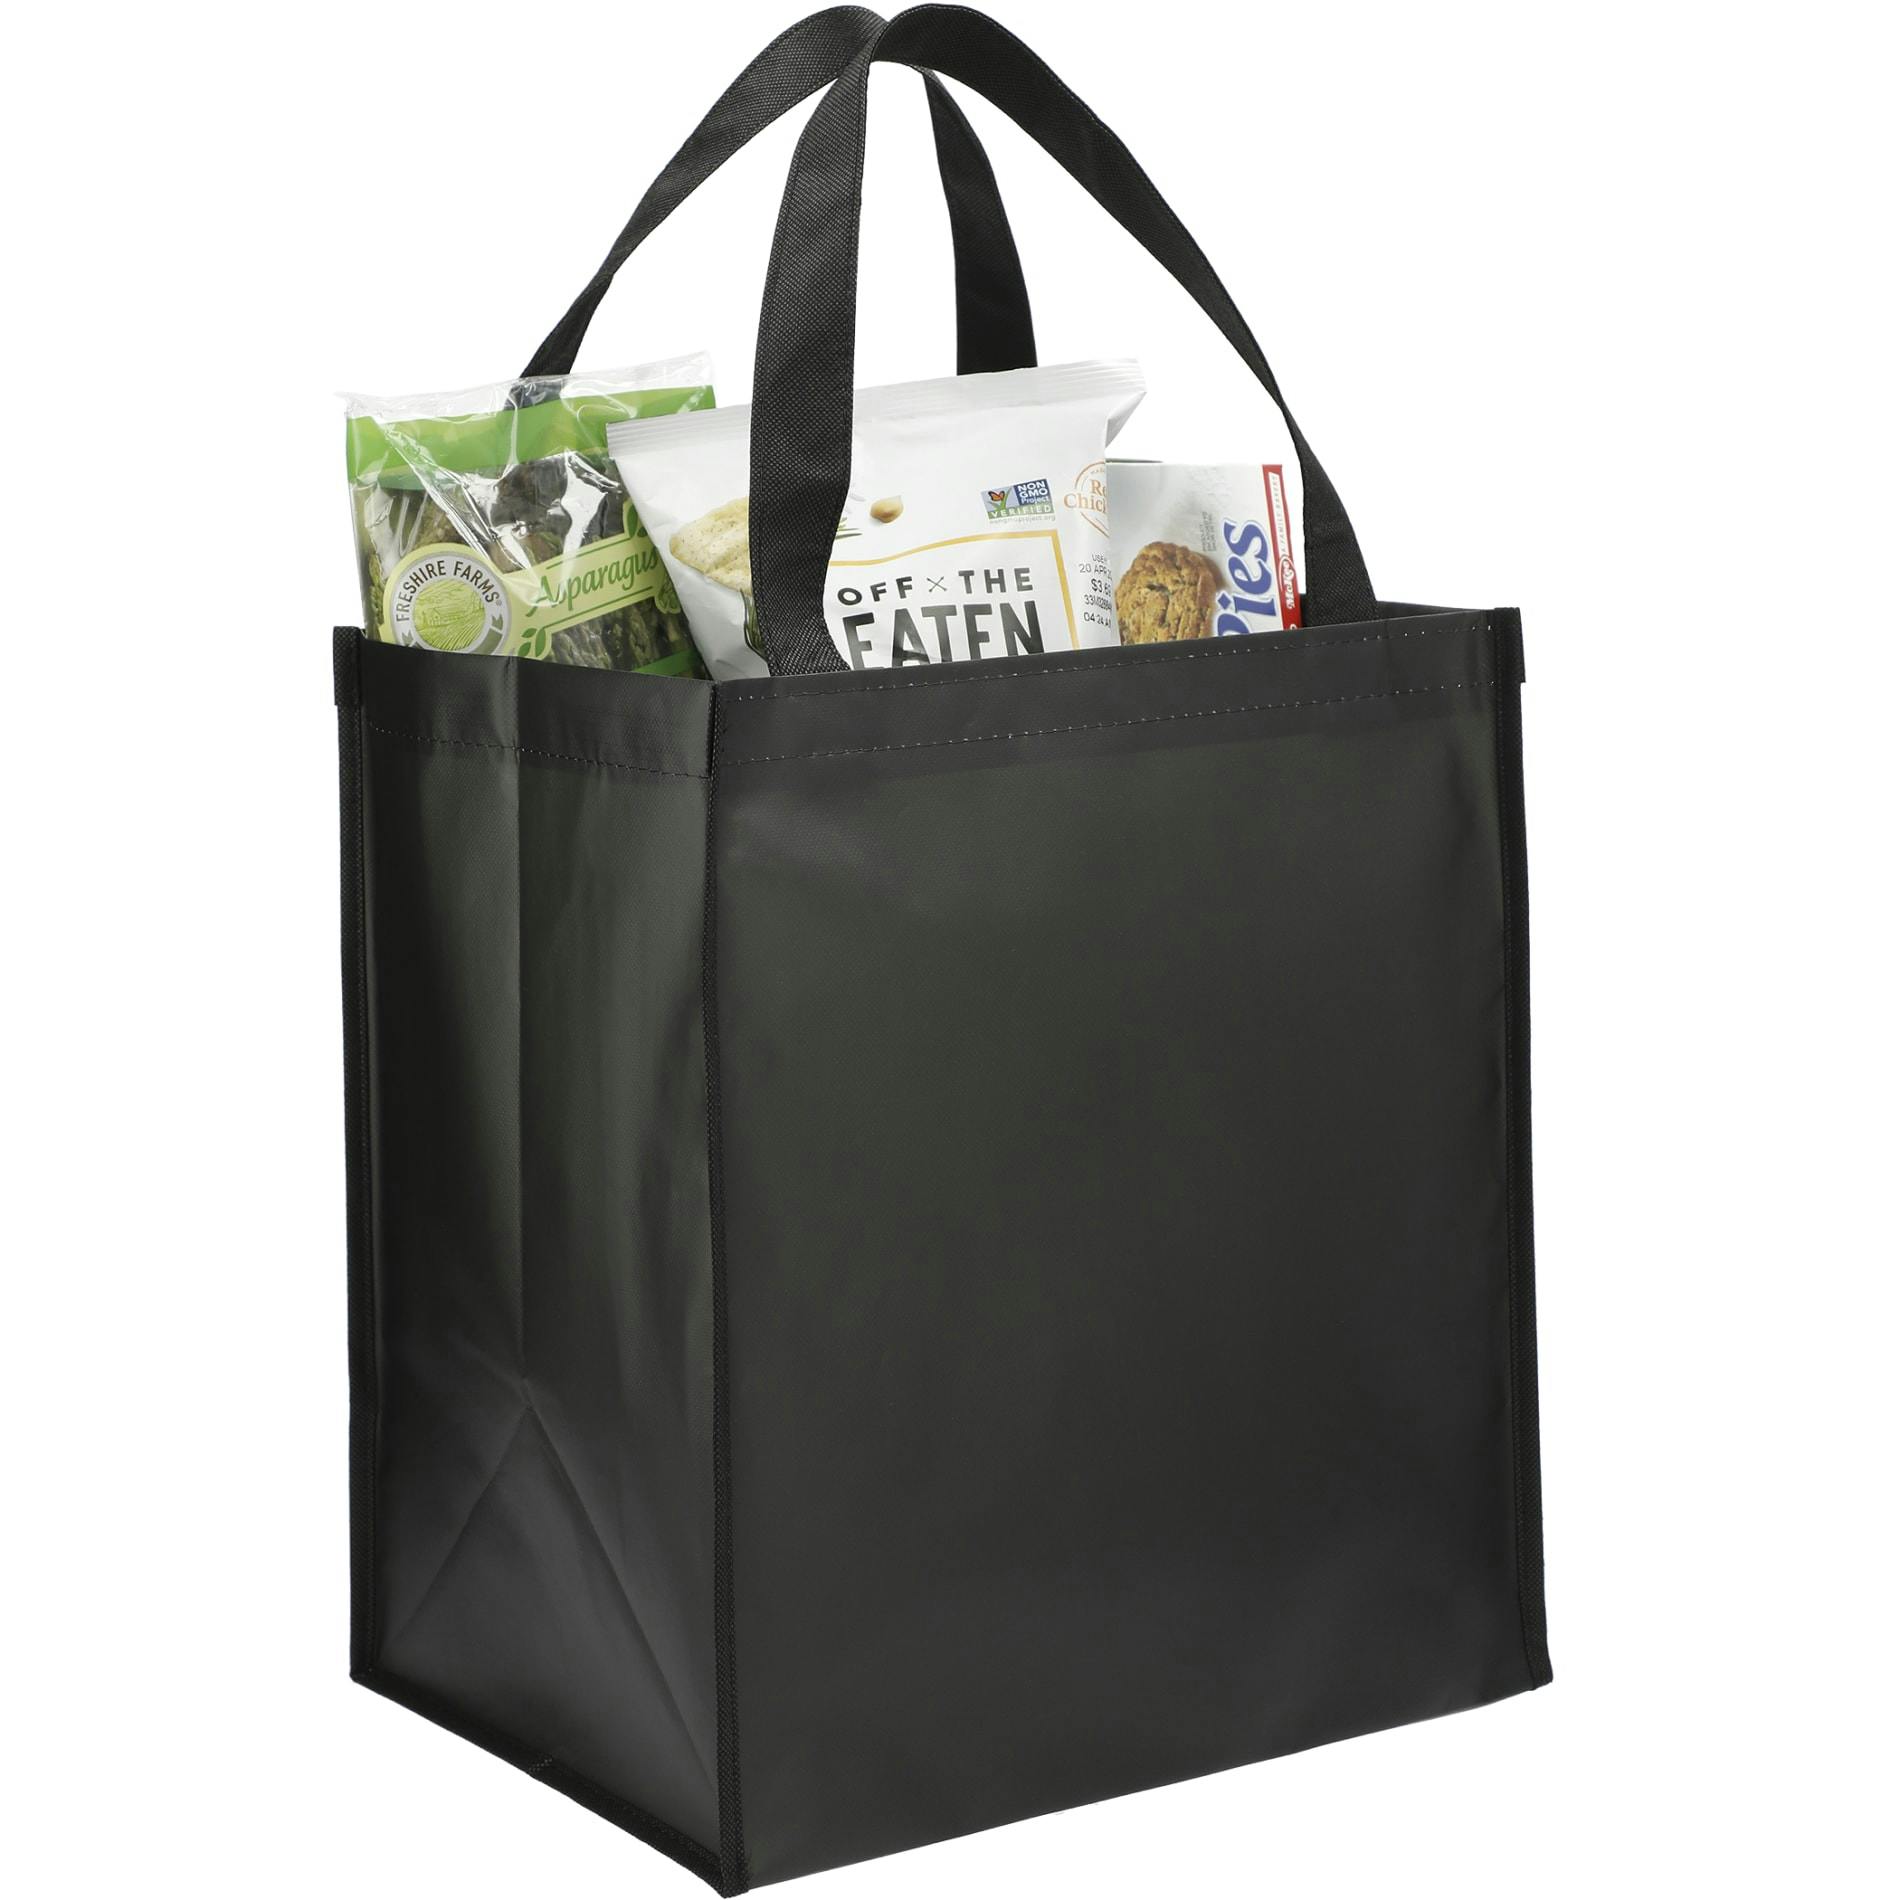 Double Laminated Wipeable Grocery Tote - additional Image 3